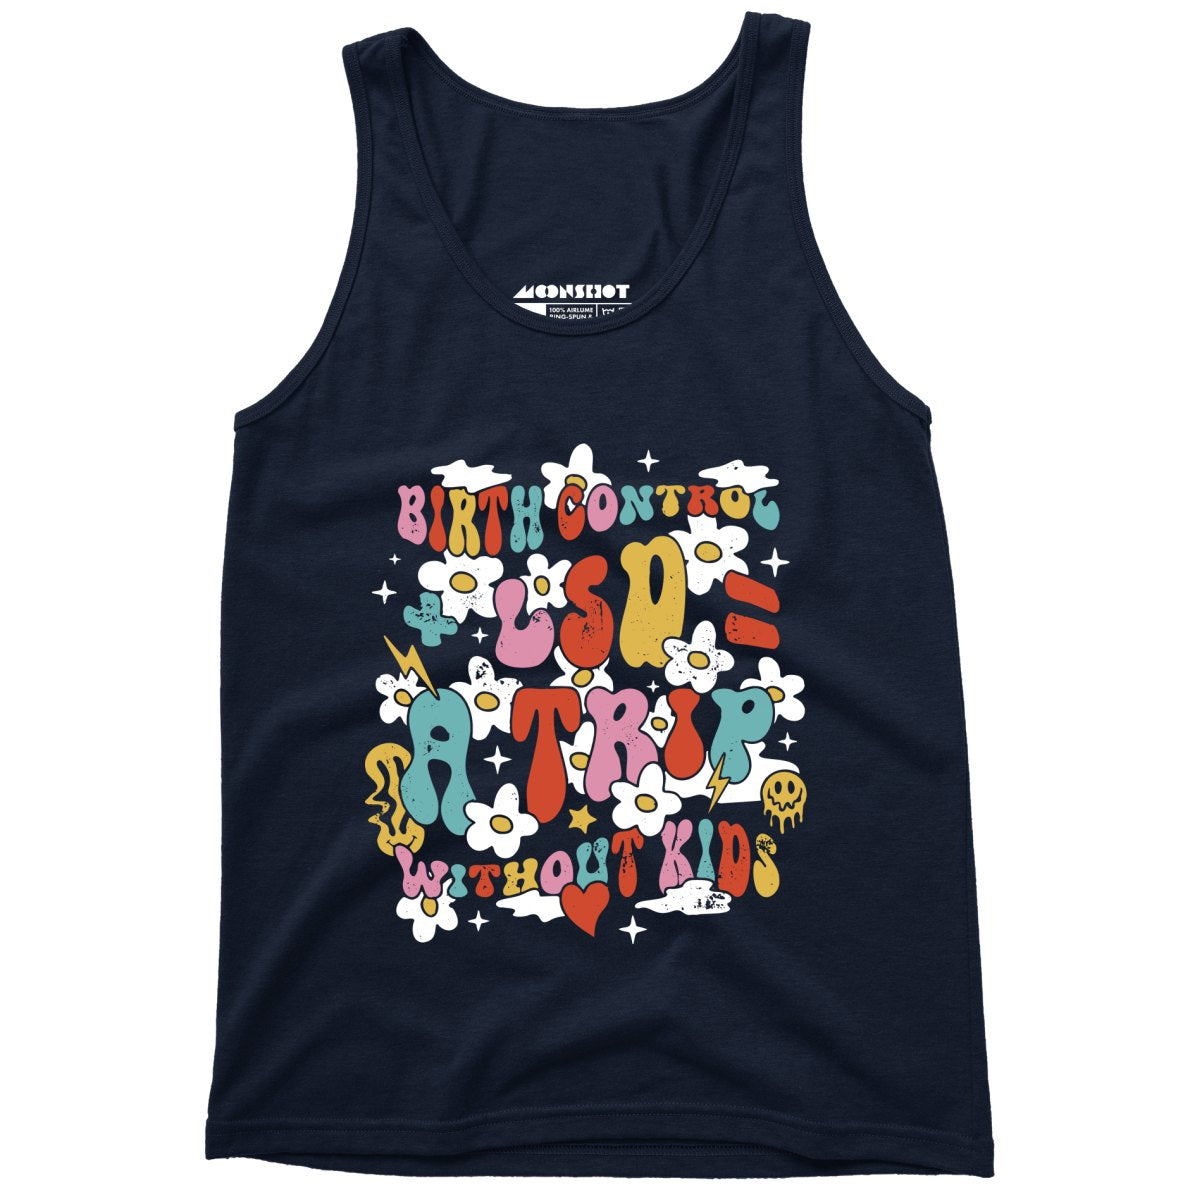 A Trip Without Kids - Unisex Tank Top